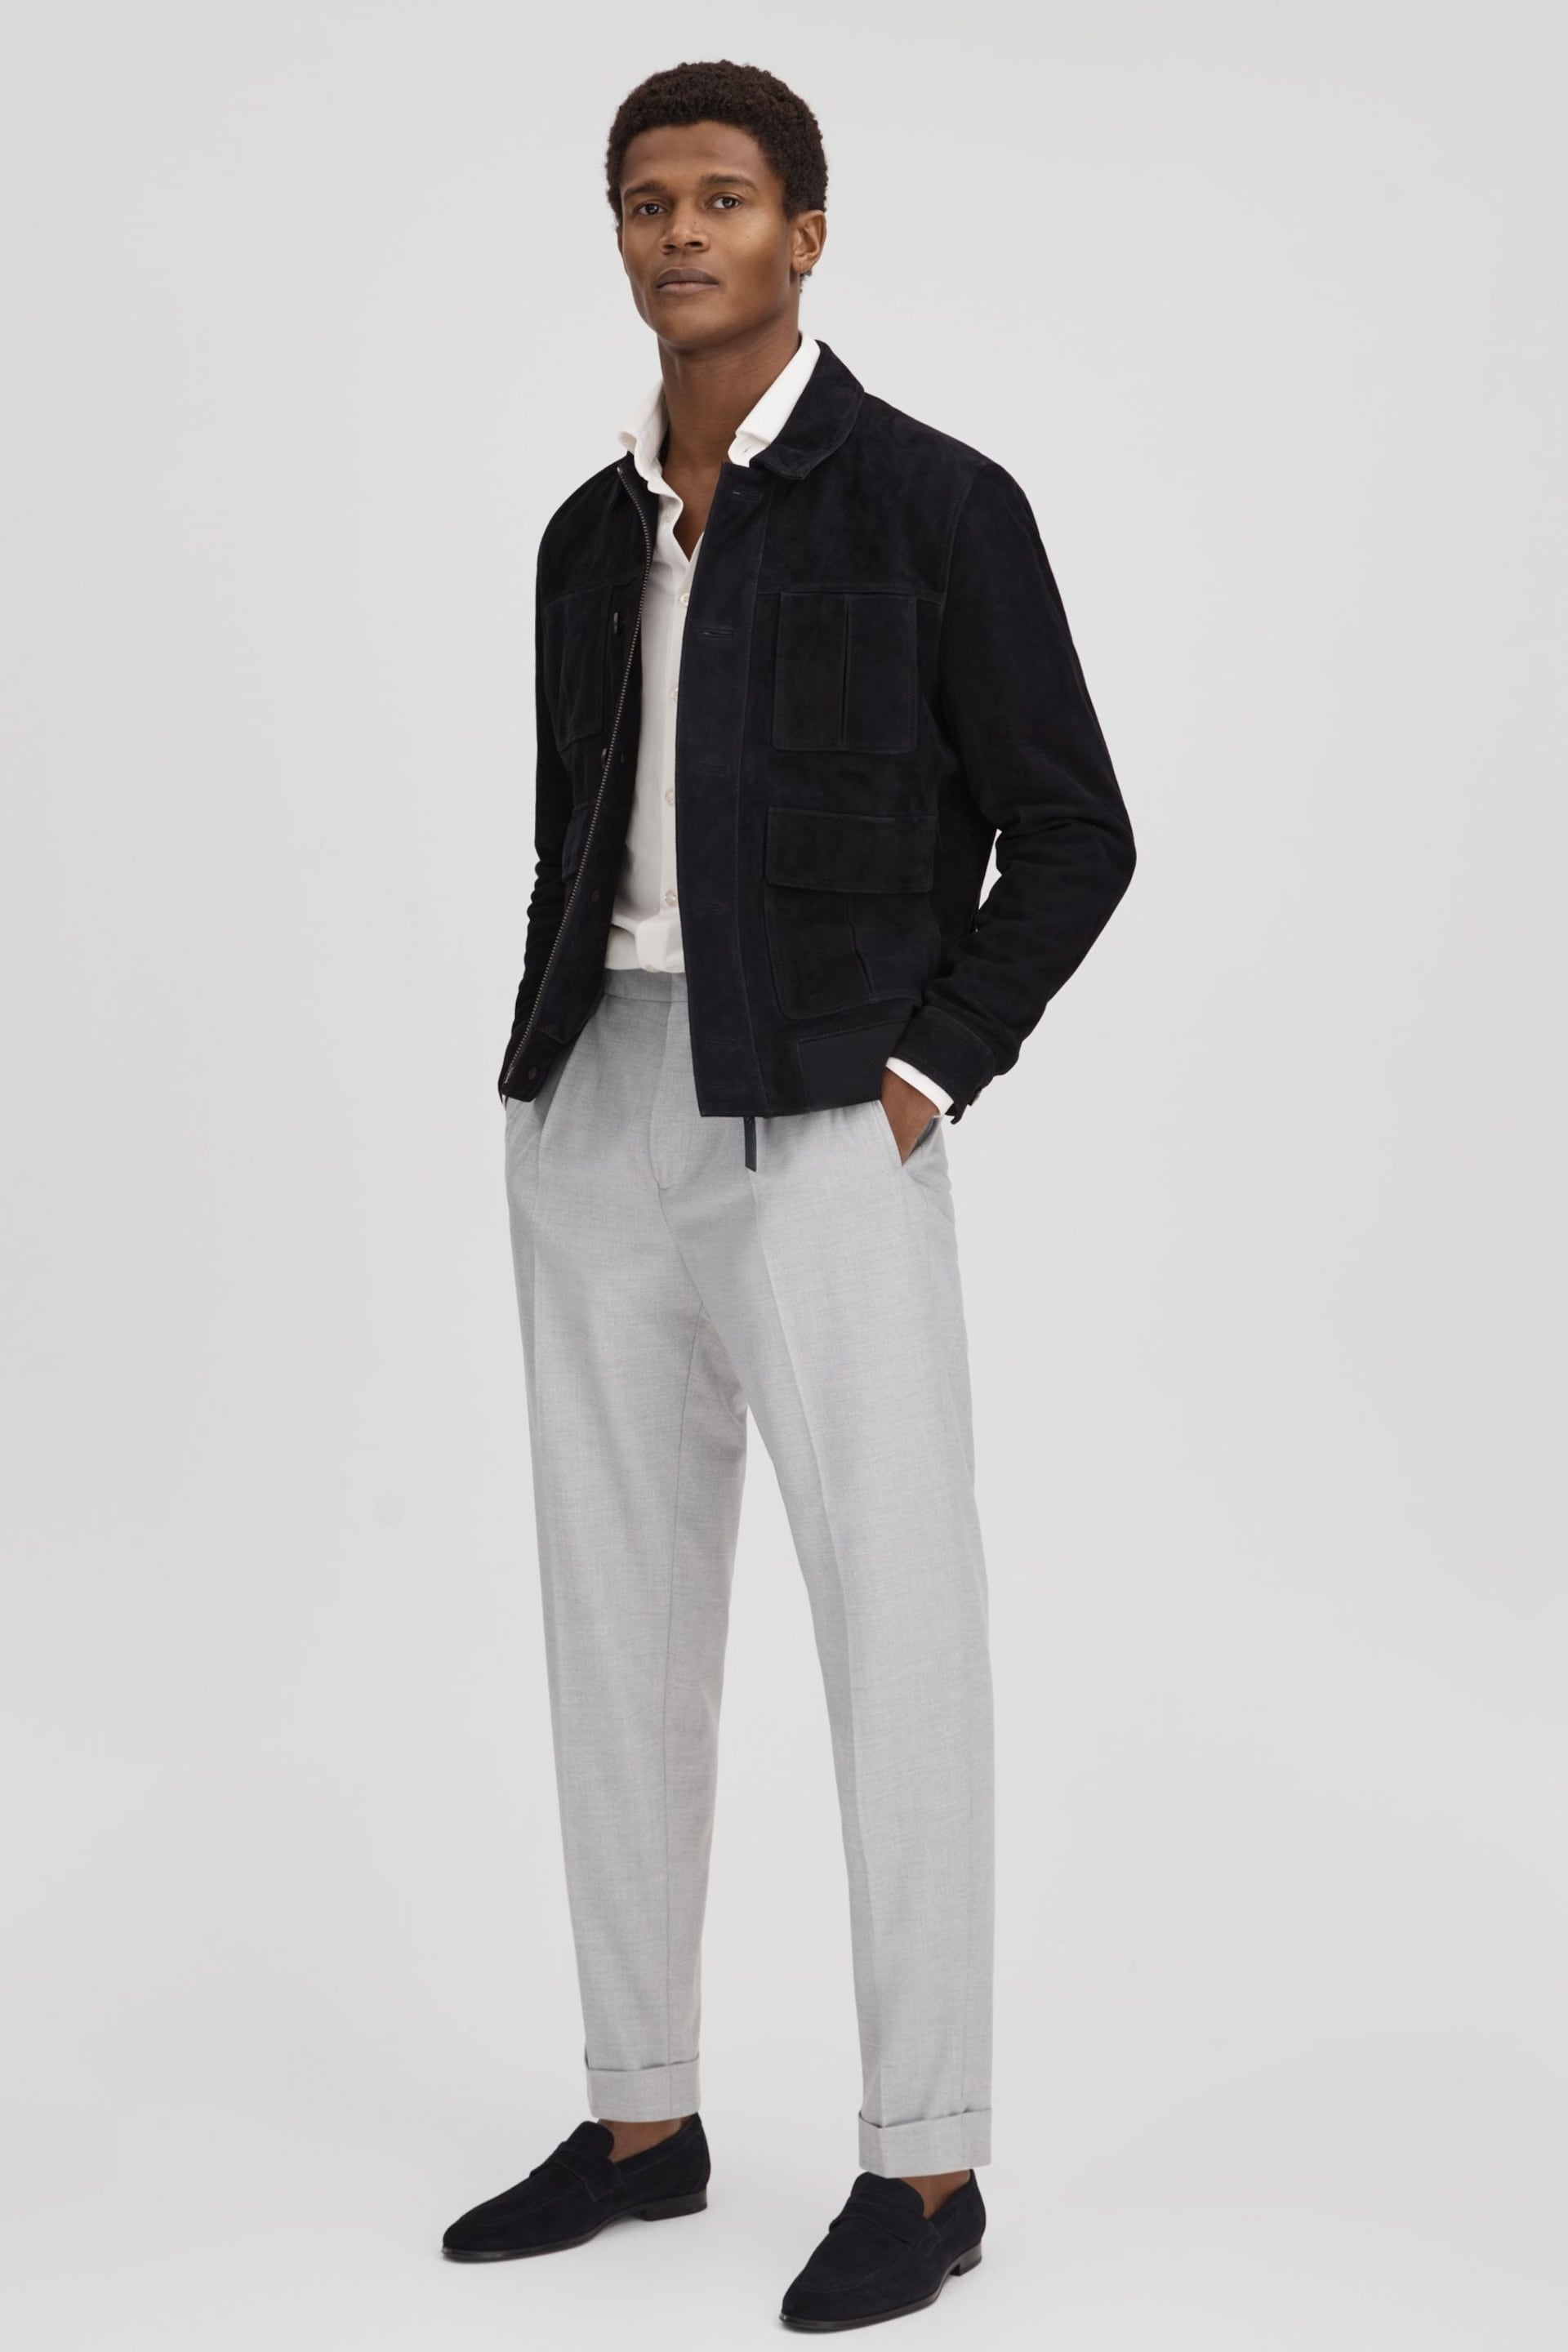 Reiss Navy Thomas Suede Chest Pocket Jacket - Image 3 of 6